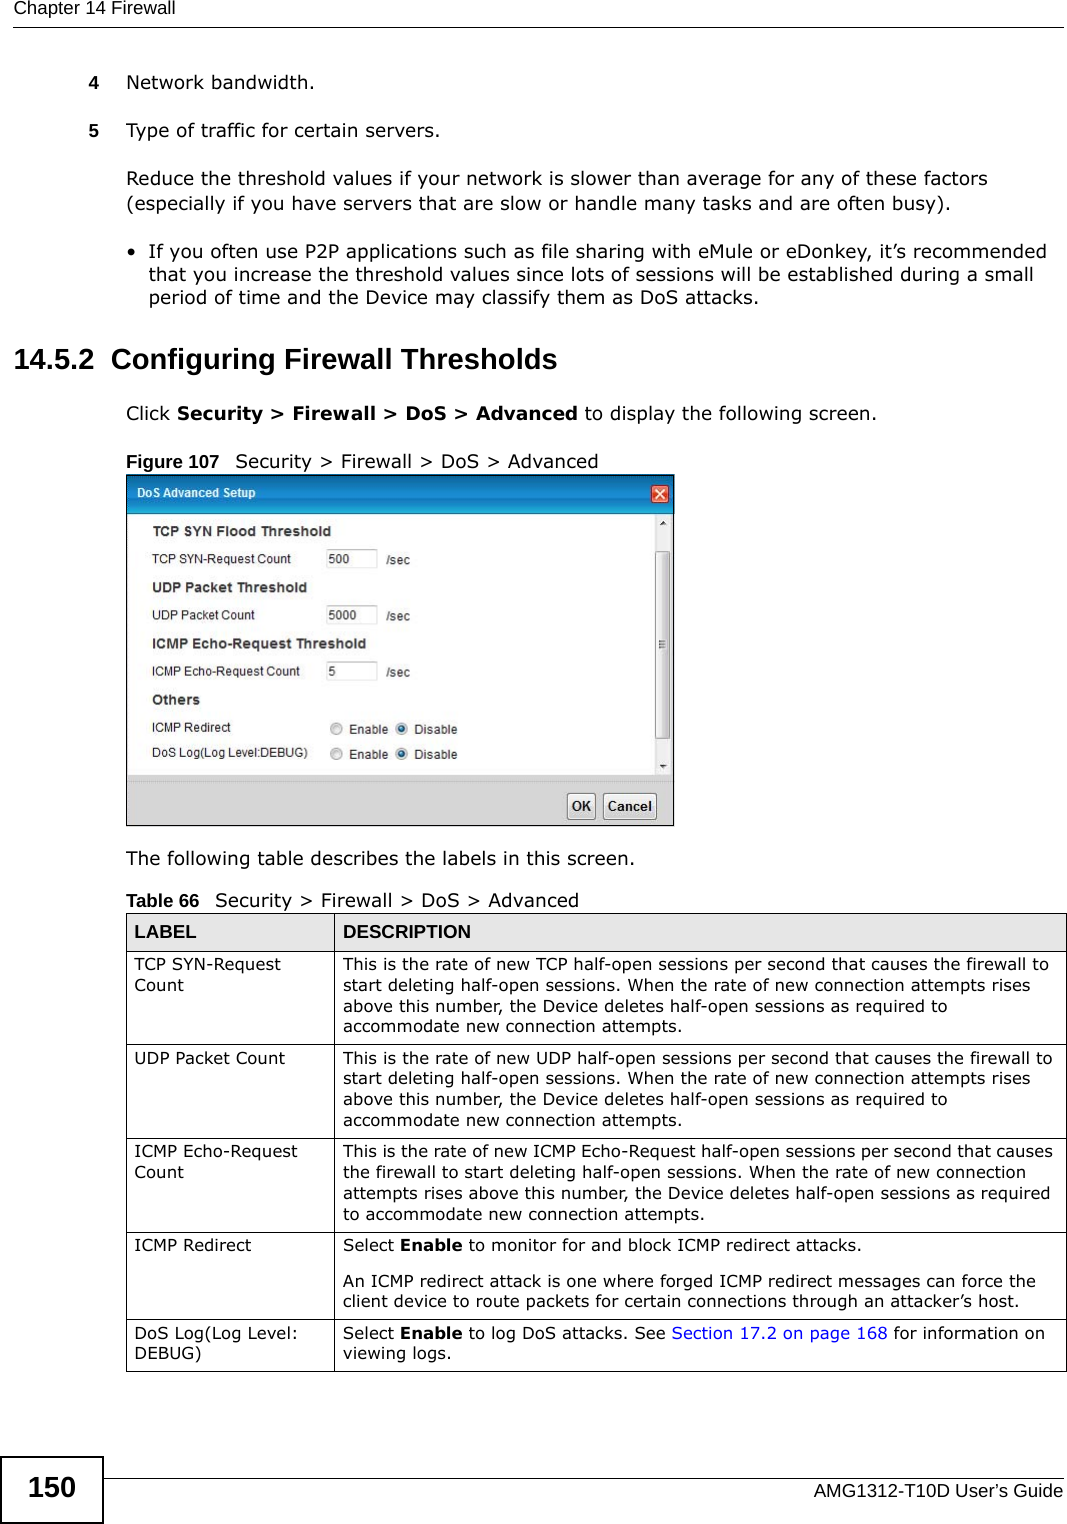 Chapter 14 FirewallAMG1312-T10D User’s Guide1504Network bandwidth. 5Type of traffic for certain servers.Reduce the threshold values if your network is slower than average for any of these factors (especially if you have servers that are slow or handle many tasks and are often busy). • If you often use P2P applications such as file sharing with eMule or eDonkey, it’s recommended that you increase the threshold values since lots of sessions will be established during a small period of time and the Device may classify them as DoS attacks. 14.5.2  Configuring Firewall ThresholdsClick Security &gt; Firewall &gt; DoS &gt; Advanced to display the following screen.Figure 107   Security &gt; Firewall &gt; DoS &gt; Advanced The following table describes the labels in this screen.Table 66   Security &gt; Firewall &gt; DoS &gt; AdvancedLABEL DESCRIPTIONTCP SYN-Request CountThis is the rate of new TCP half-open sessions per second that causes the firewall to start deleting half-open sessions. When the rate of new connection attempts rises above this number, the Device deletes half-open sessions as required to accommodate new connection attempts.UDP Packet Count This is the rate of new UDP half-open sessions per second that causes the firewall to start deleting half-open sessions. When the rate of new connection attempts rises above this number, the Device deletes half-open sessions as required to accommodate new connection attempts.ICMP Echo-Request CountThis is the rate of new ICMP Echo-Request half-open sessions per second that causes the firewall to start deleting half-open sessions. When the rate of new connection attempts rises above this number, the Device deletes half-open sessions as required to accommodate new connection attempts.ICMP Redirect Select Enable to monitor for and block ICMP redirect attacks.An ICMP redirect attack is one where forged ICMP redirect messages can force the client device to route packets for certain connections through an attacker’s host.DoS Log(Log Level: DEBUG)Select Enable to log DoS attacks. See Section 17.2 on page 168 for information on viewing logs.